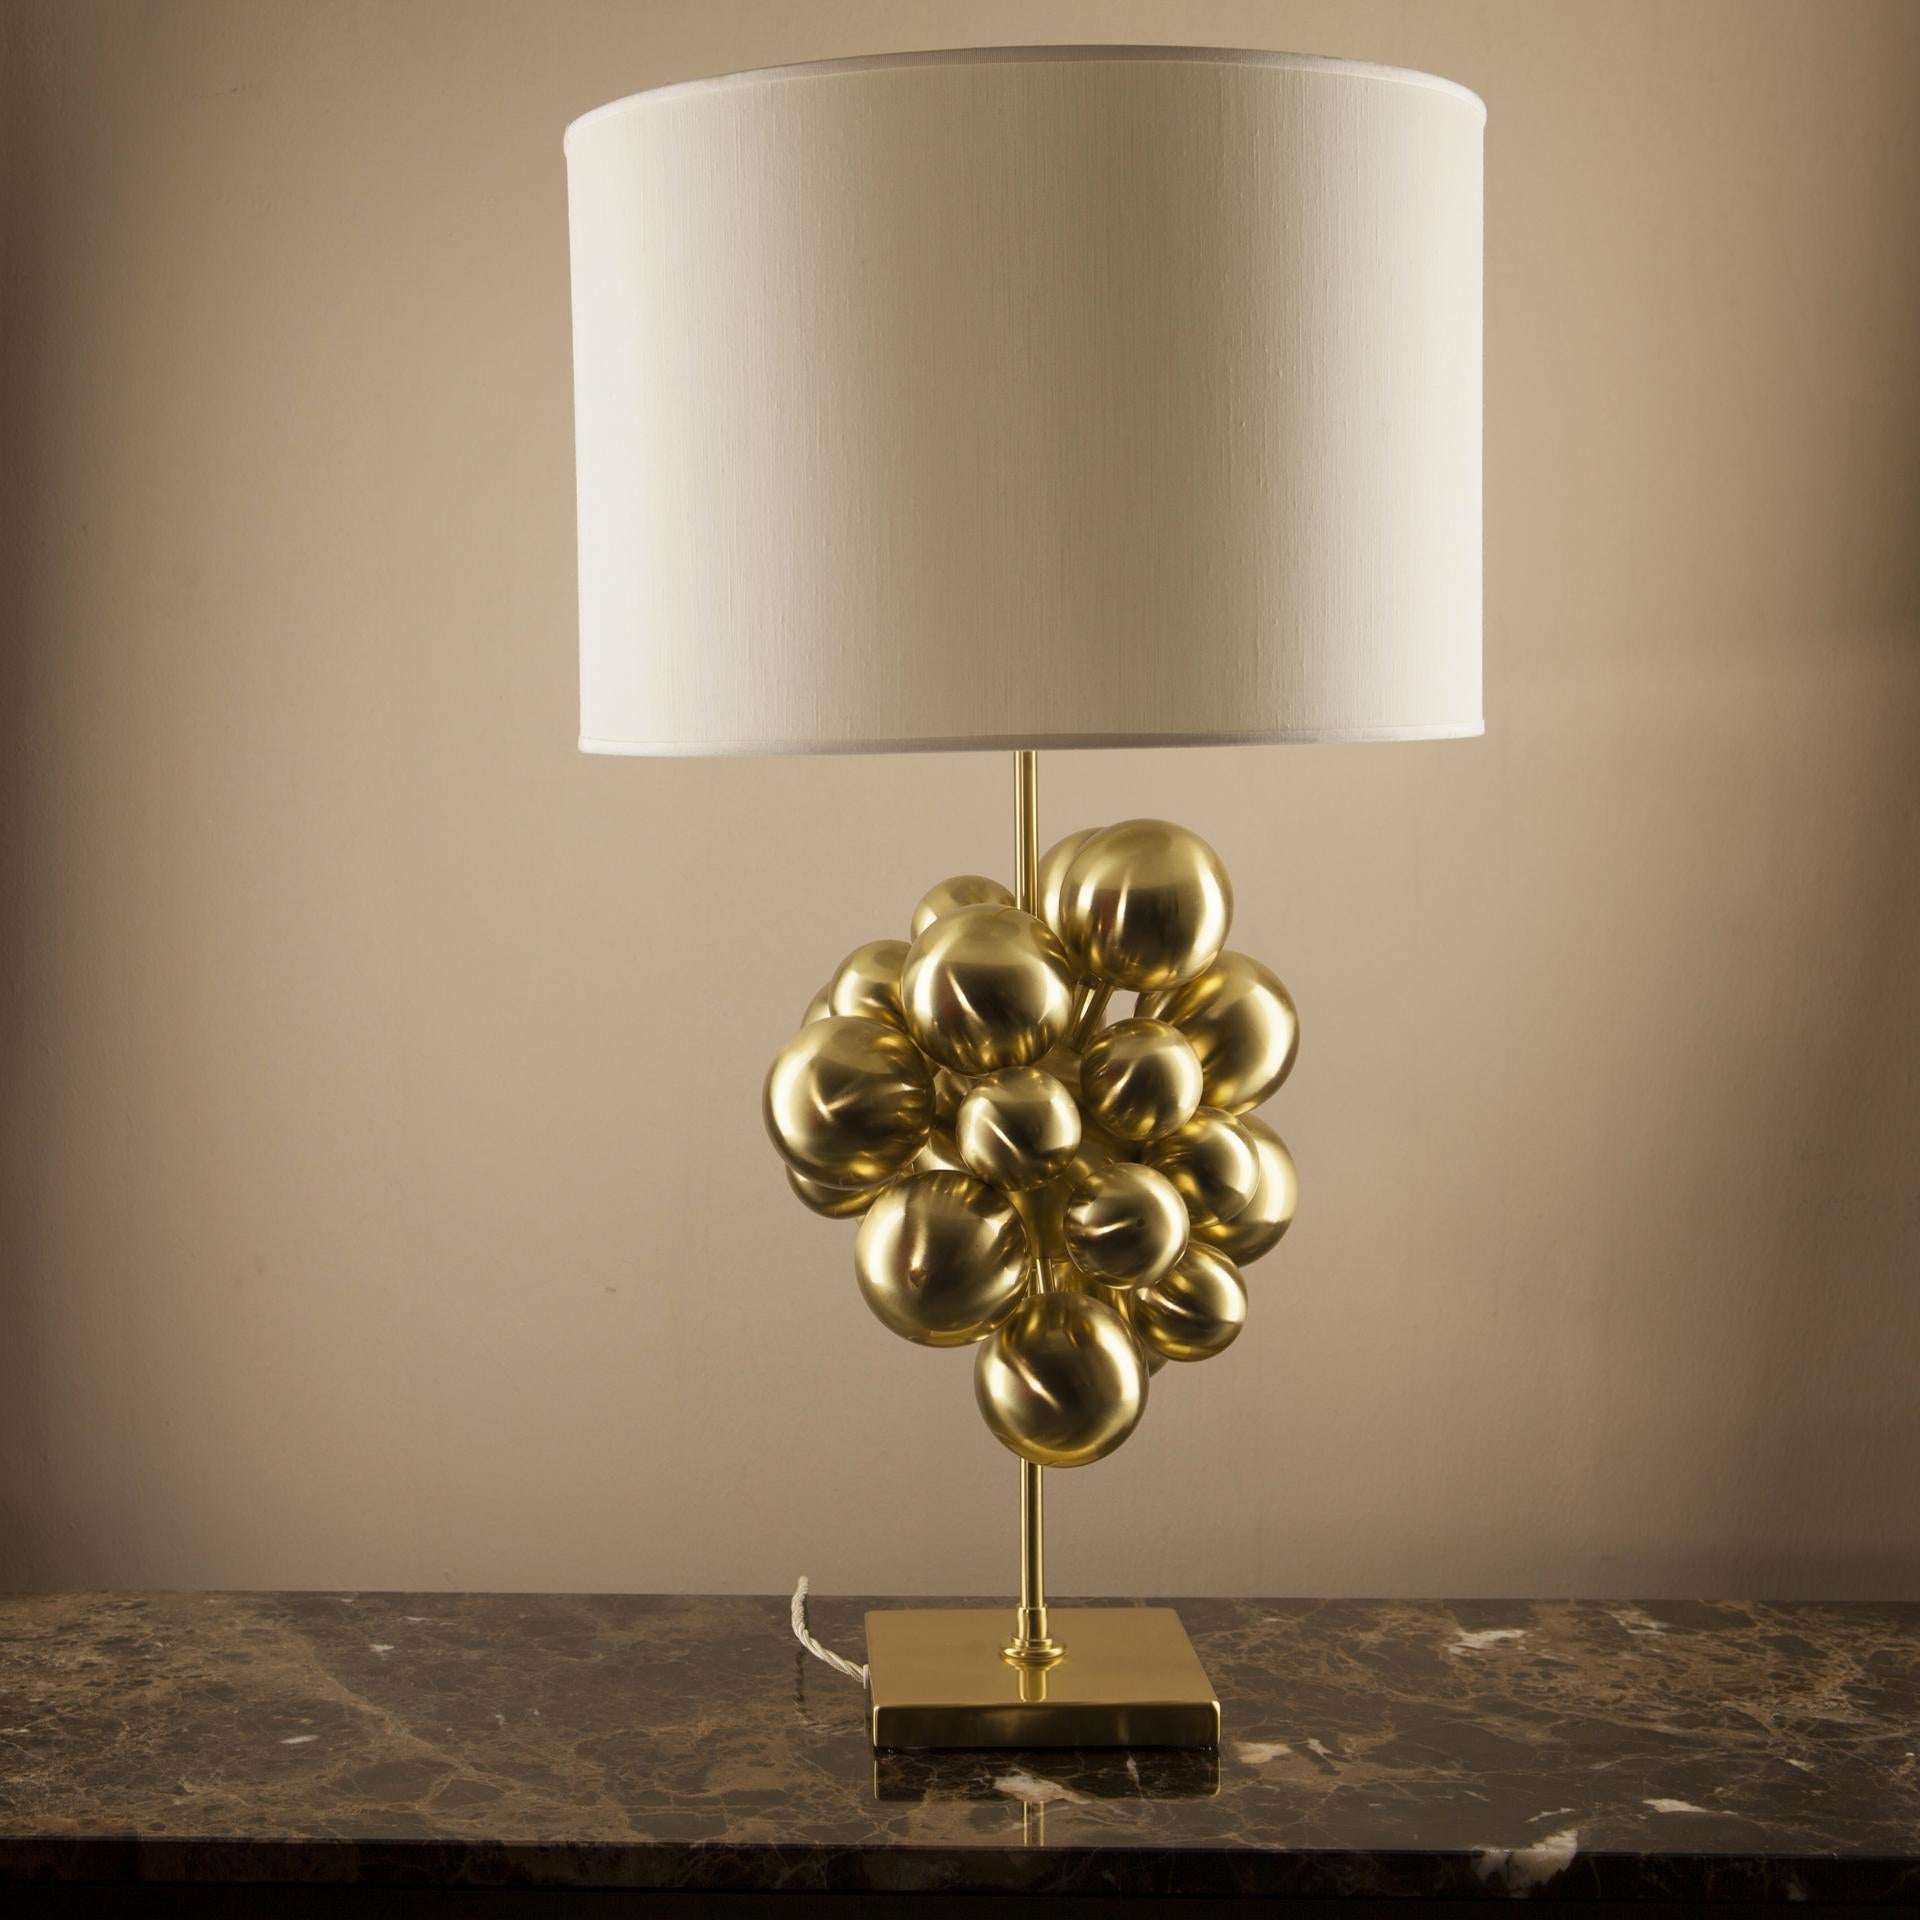 Plutone Table Lamp, Solid Brass Spheres, Florence Italy Production For Sale 4